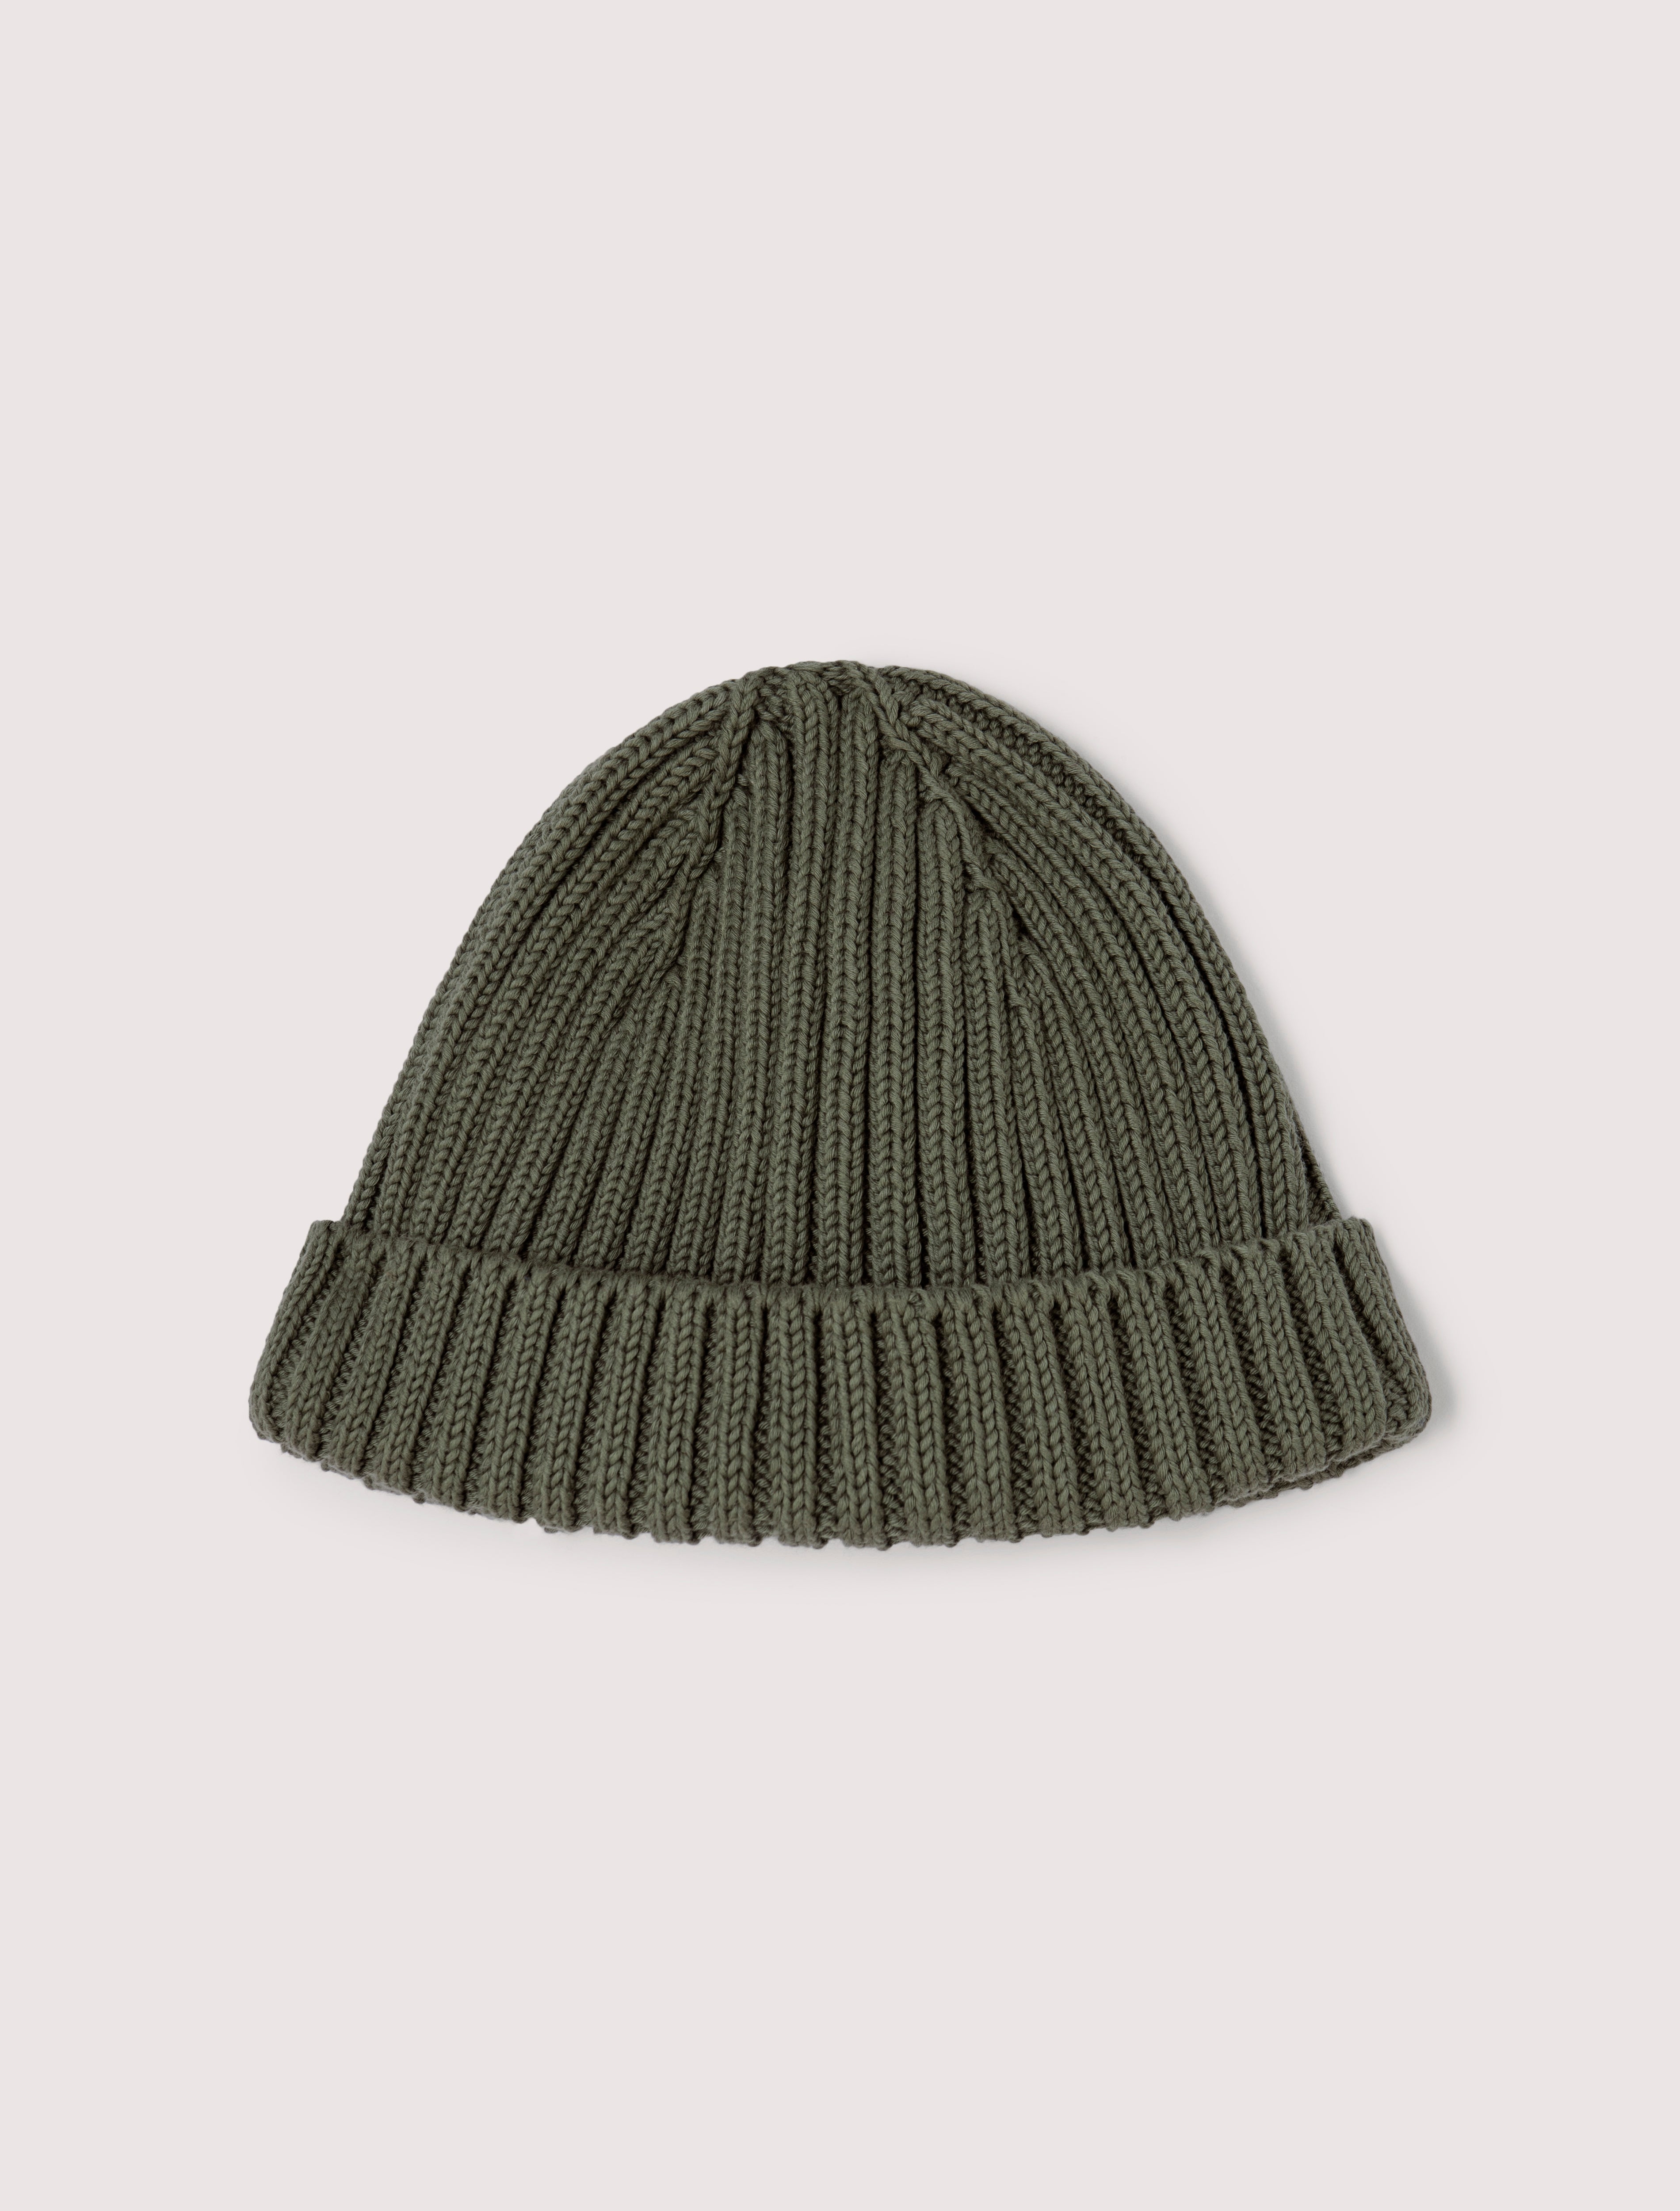 CARRER_ORIA KNITTED BEANIE IN GREEN